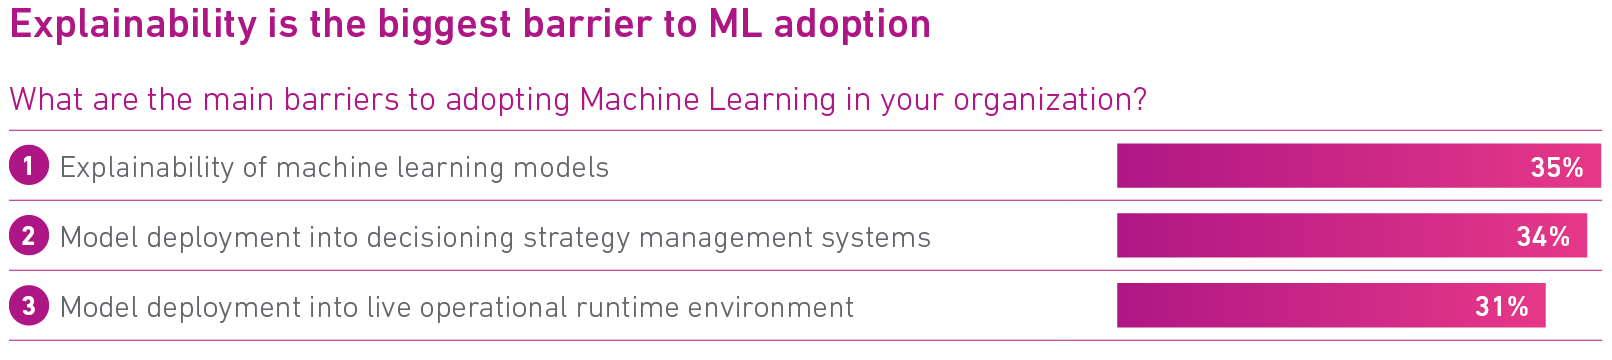 Explainability biggest barrier to Machine Learning